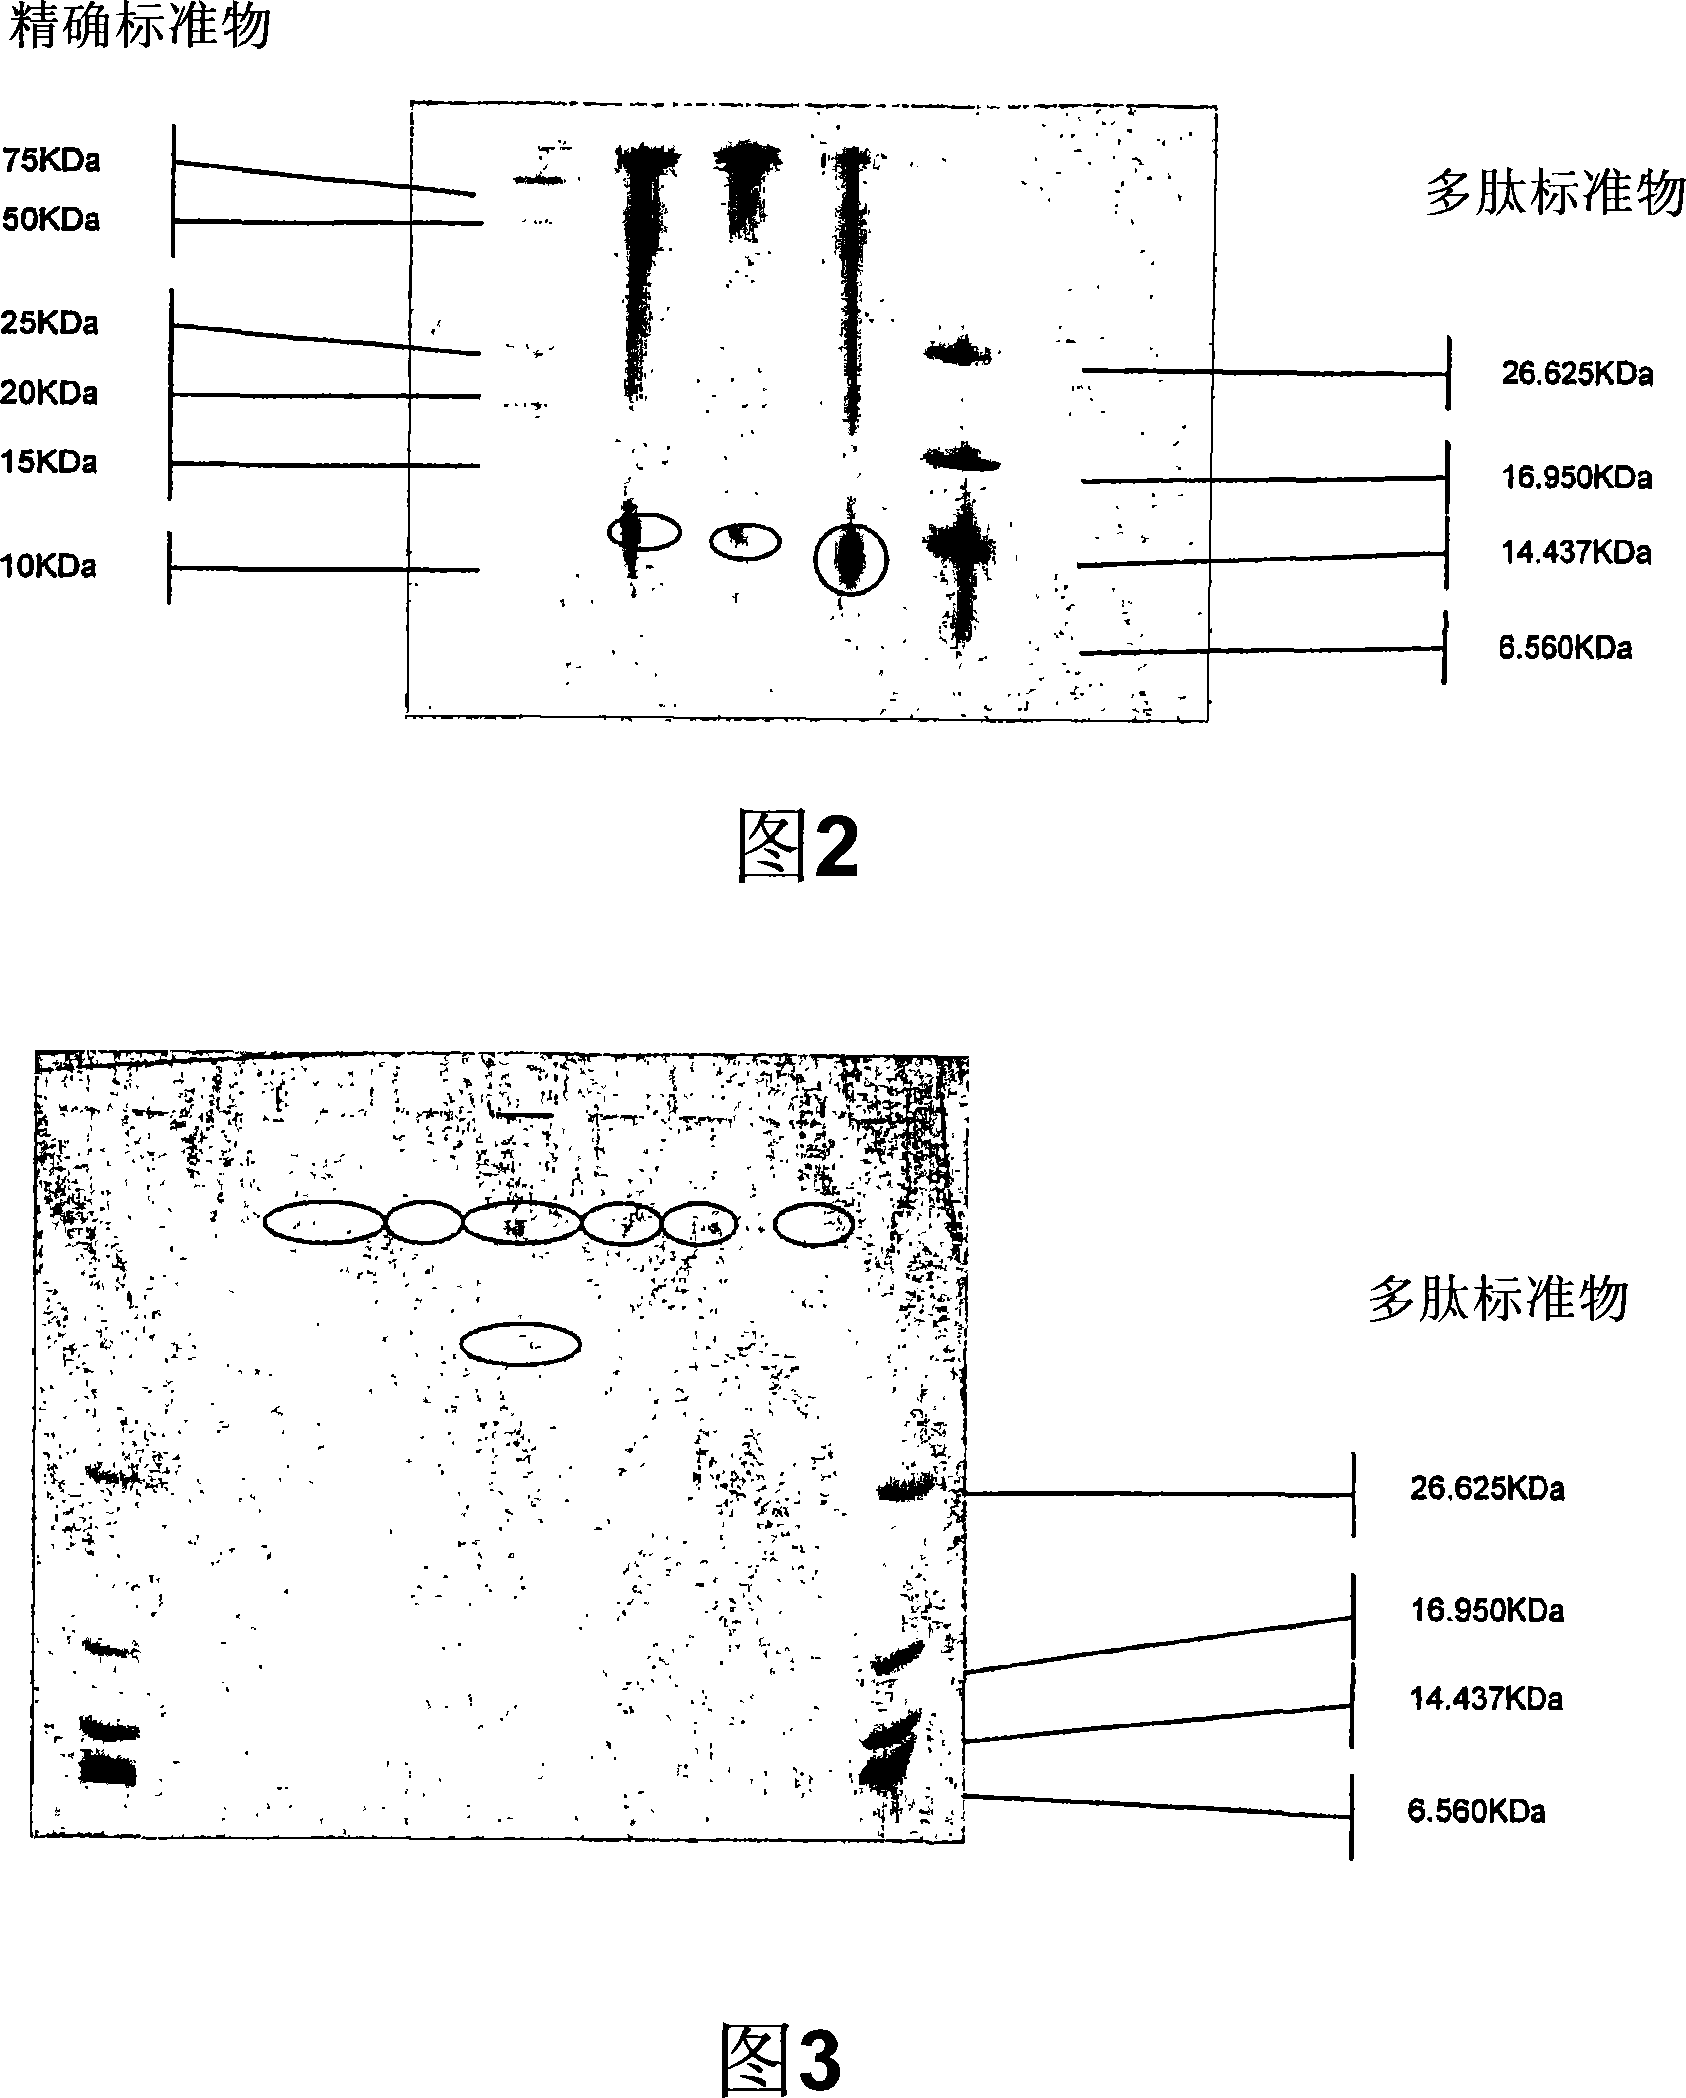 Method for separating keratinous proteins from materials